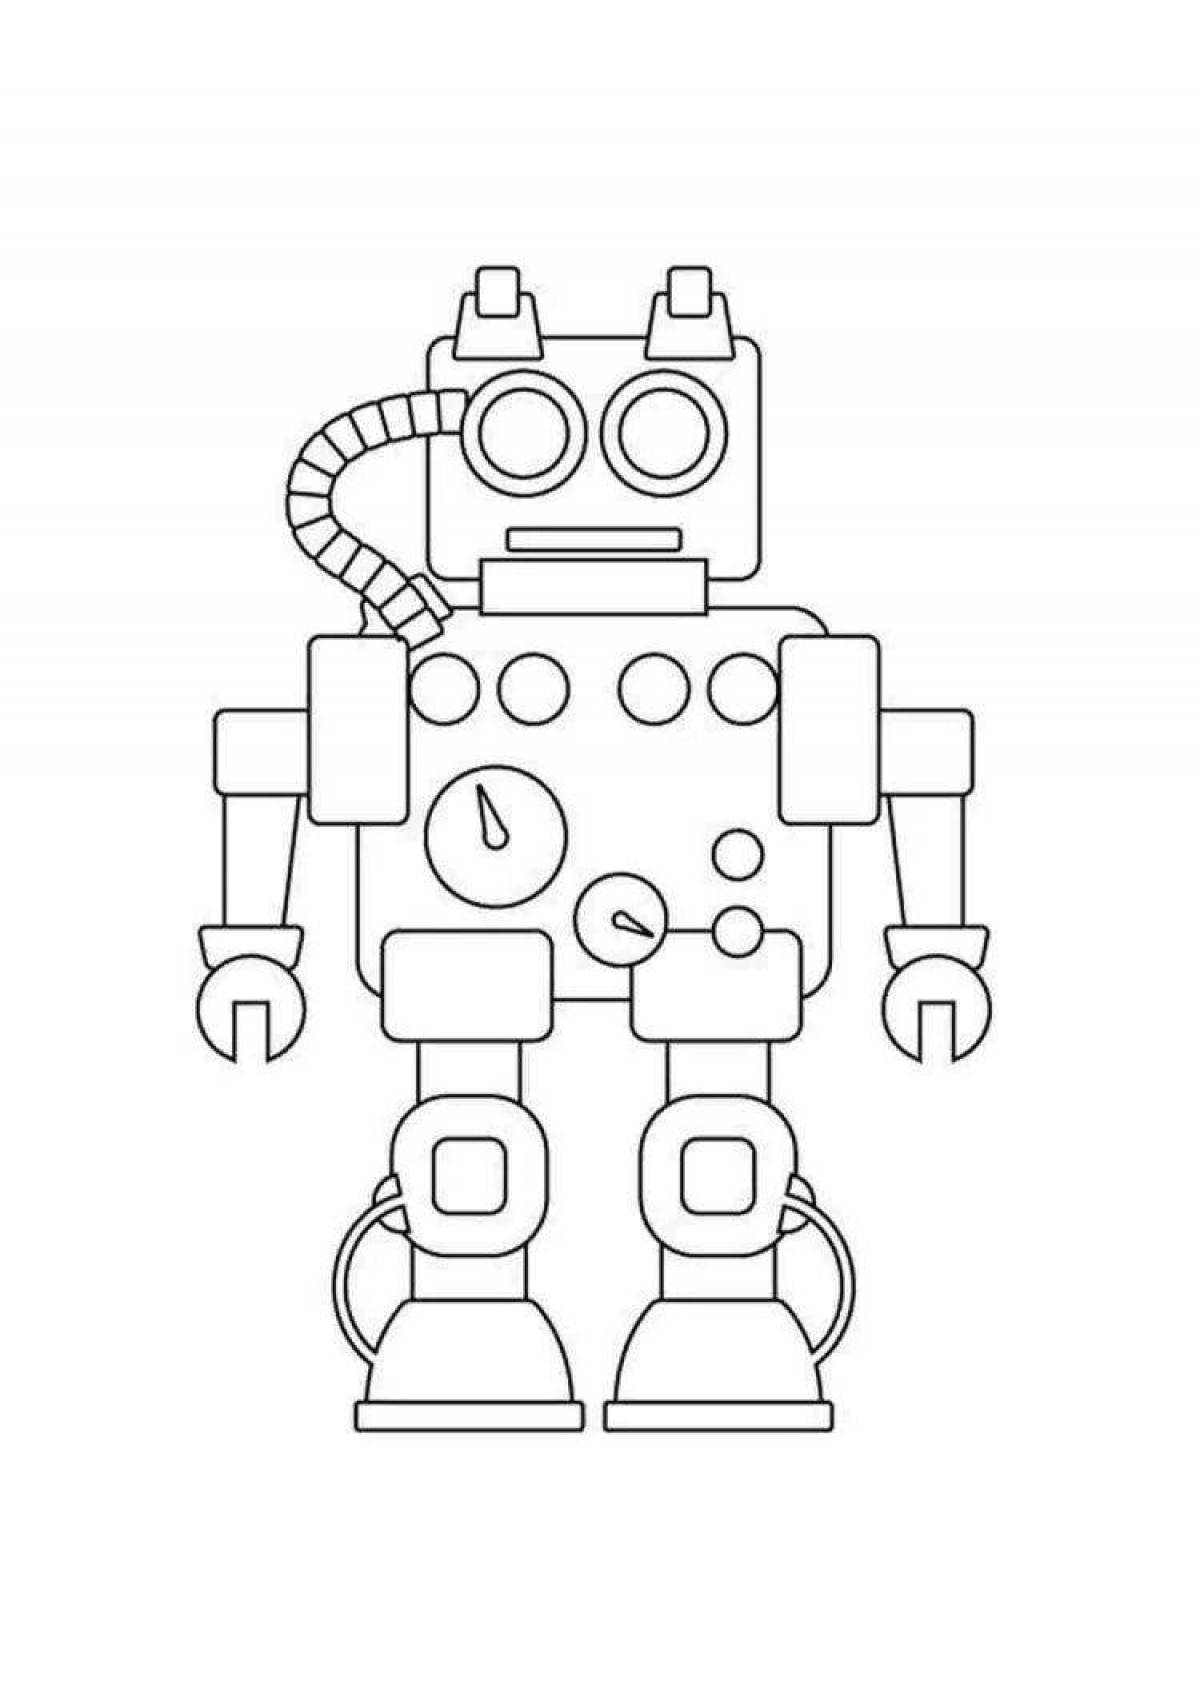 Coloring robots for children 5-7 years old